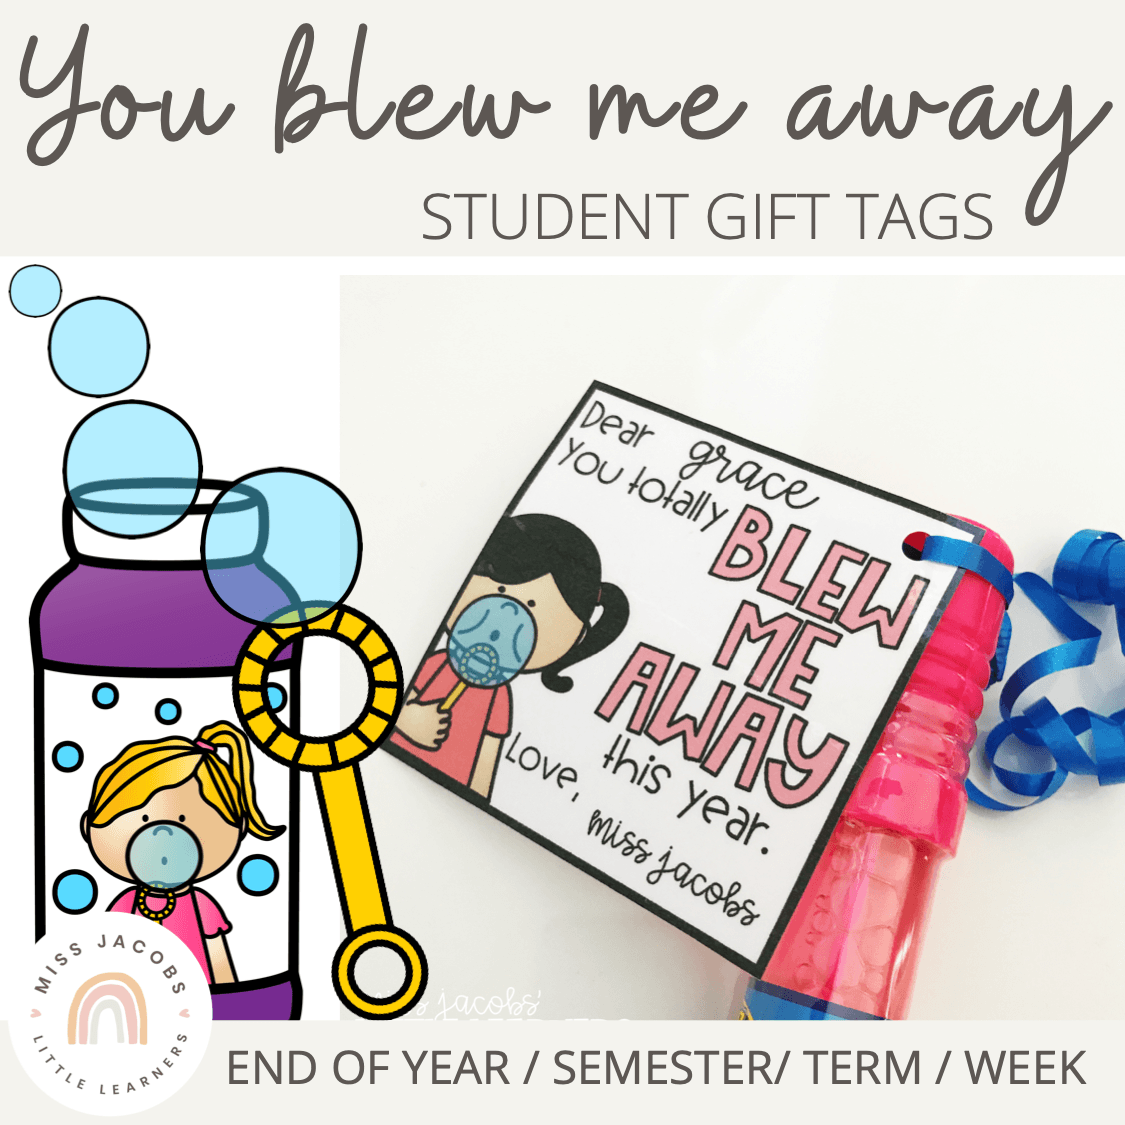 Student Gift Tags for Bubble Wand, You blew me away